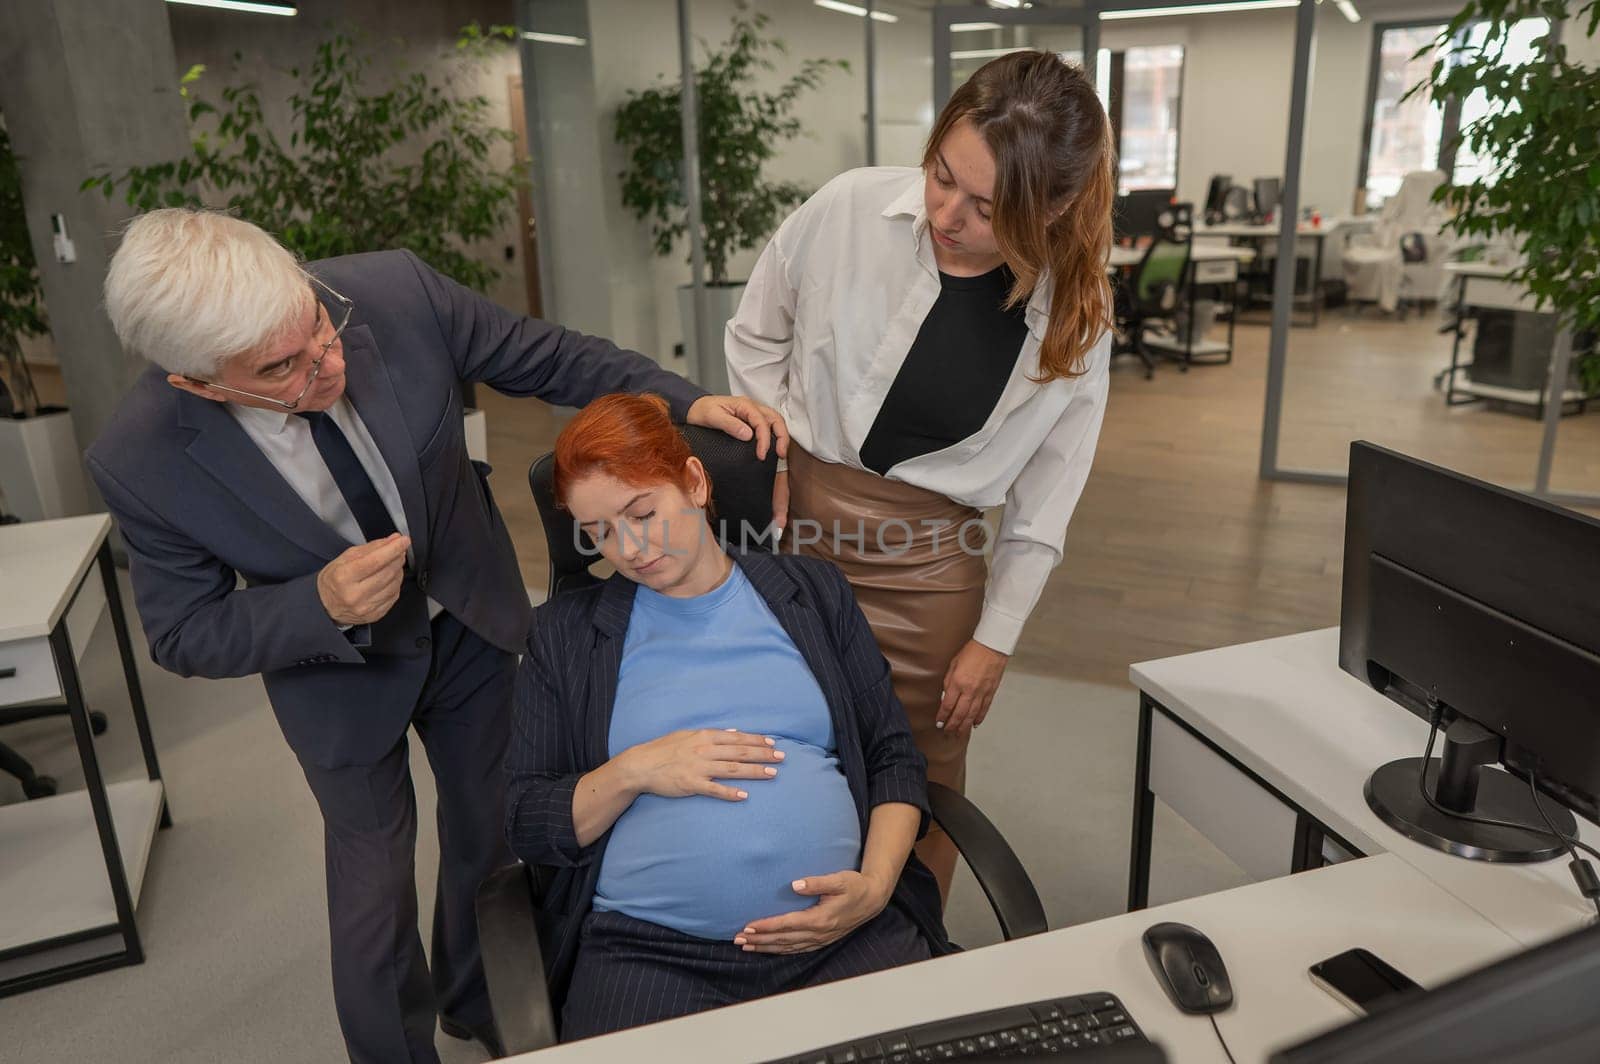 An elderly Caucasian man and woman look disapprovingly at their sleeping pregnant colleague in the office. by mrwed54